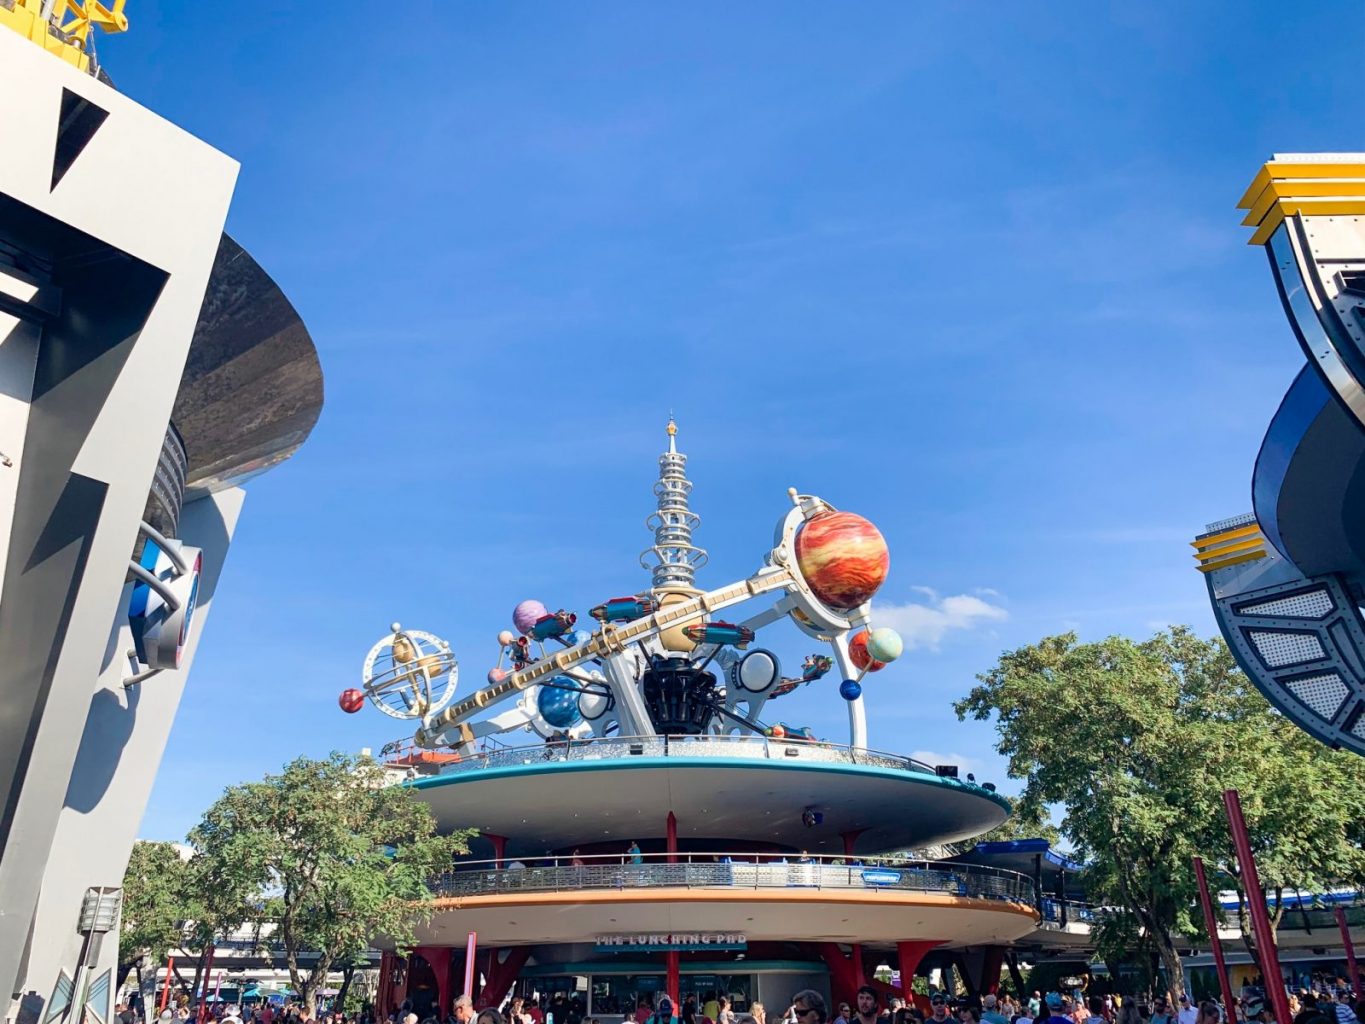 view of the Astro Orbiter from the entrance of Tomorrowland